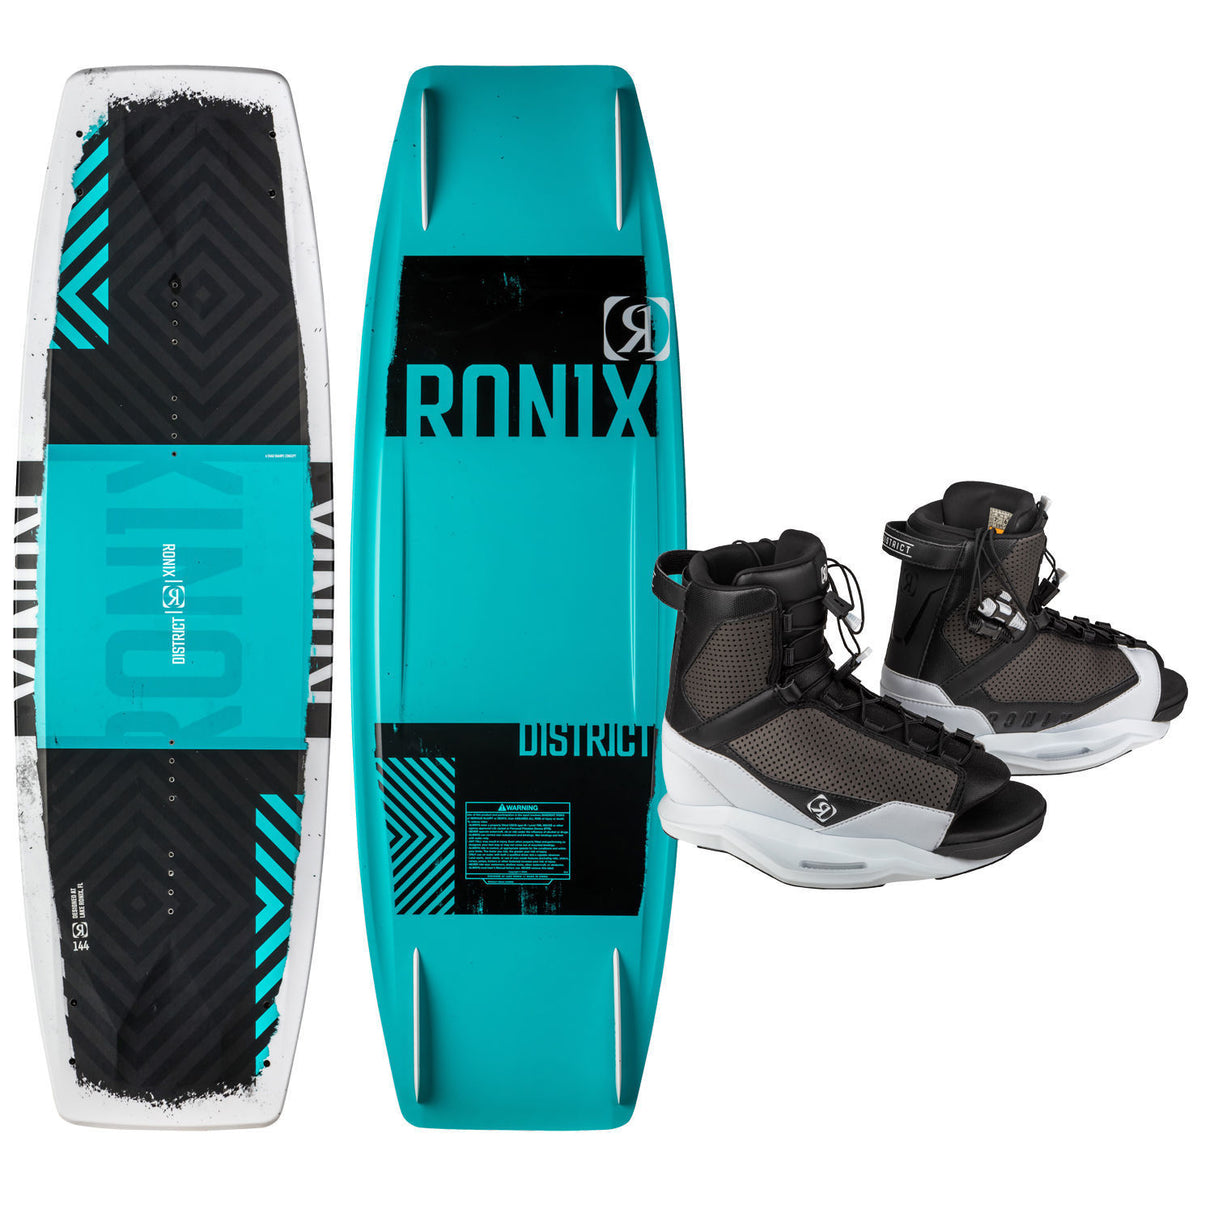 Ronix District Wakeboard w/ District Bindings